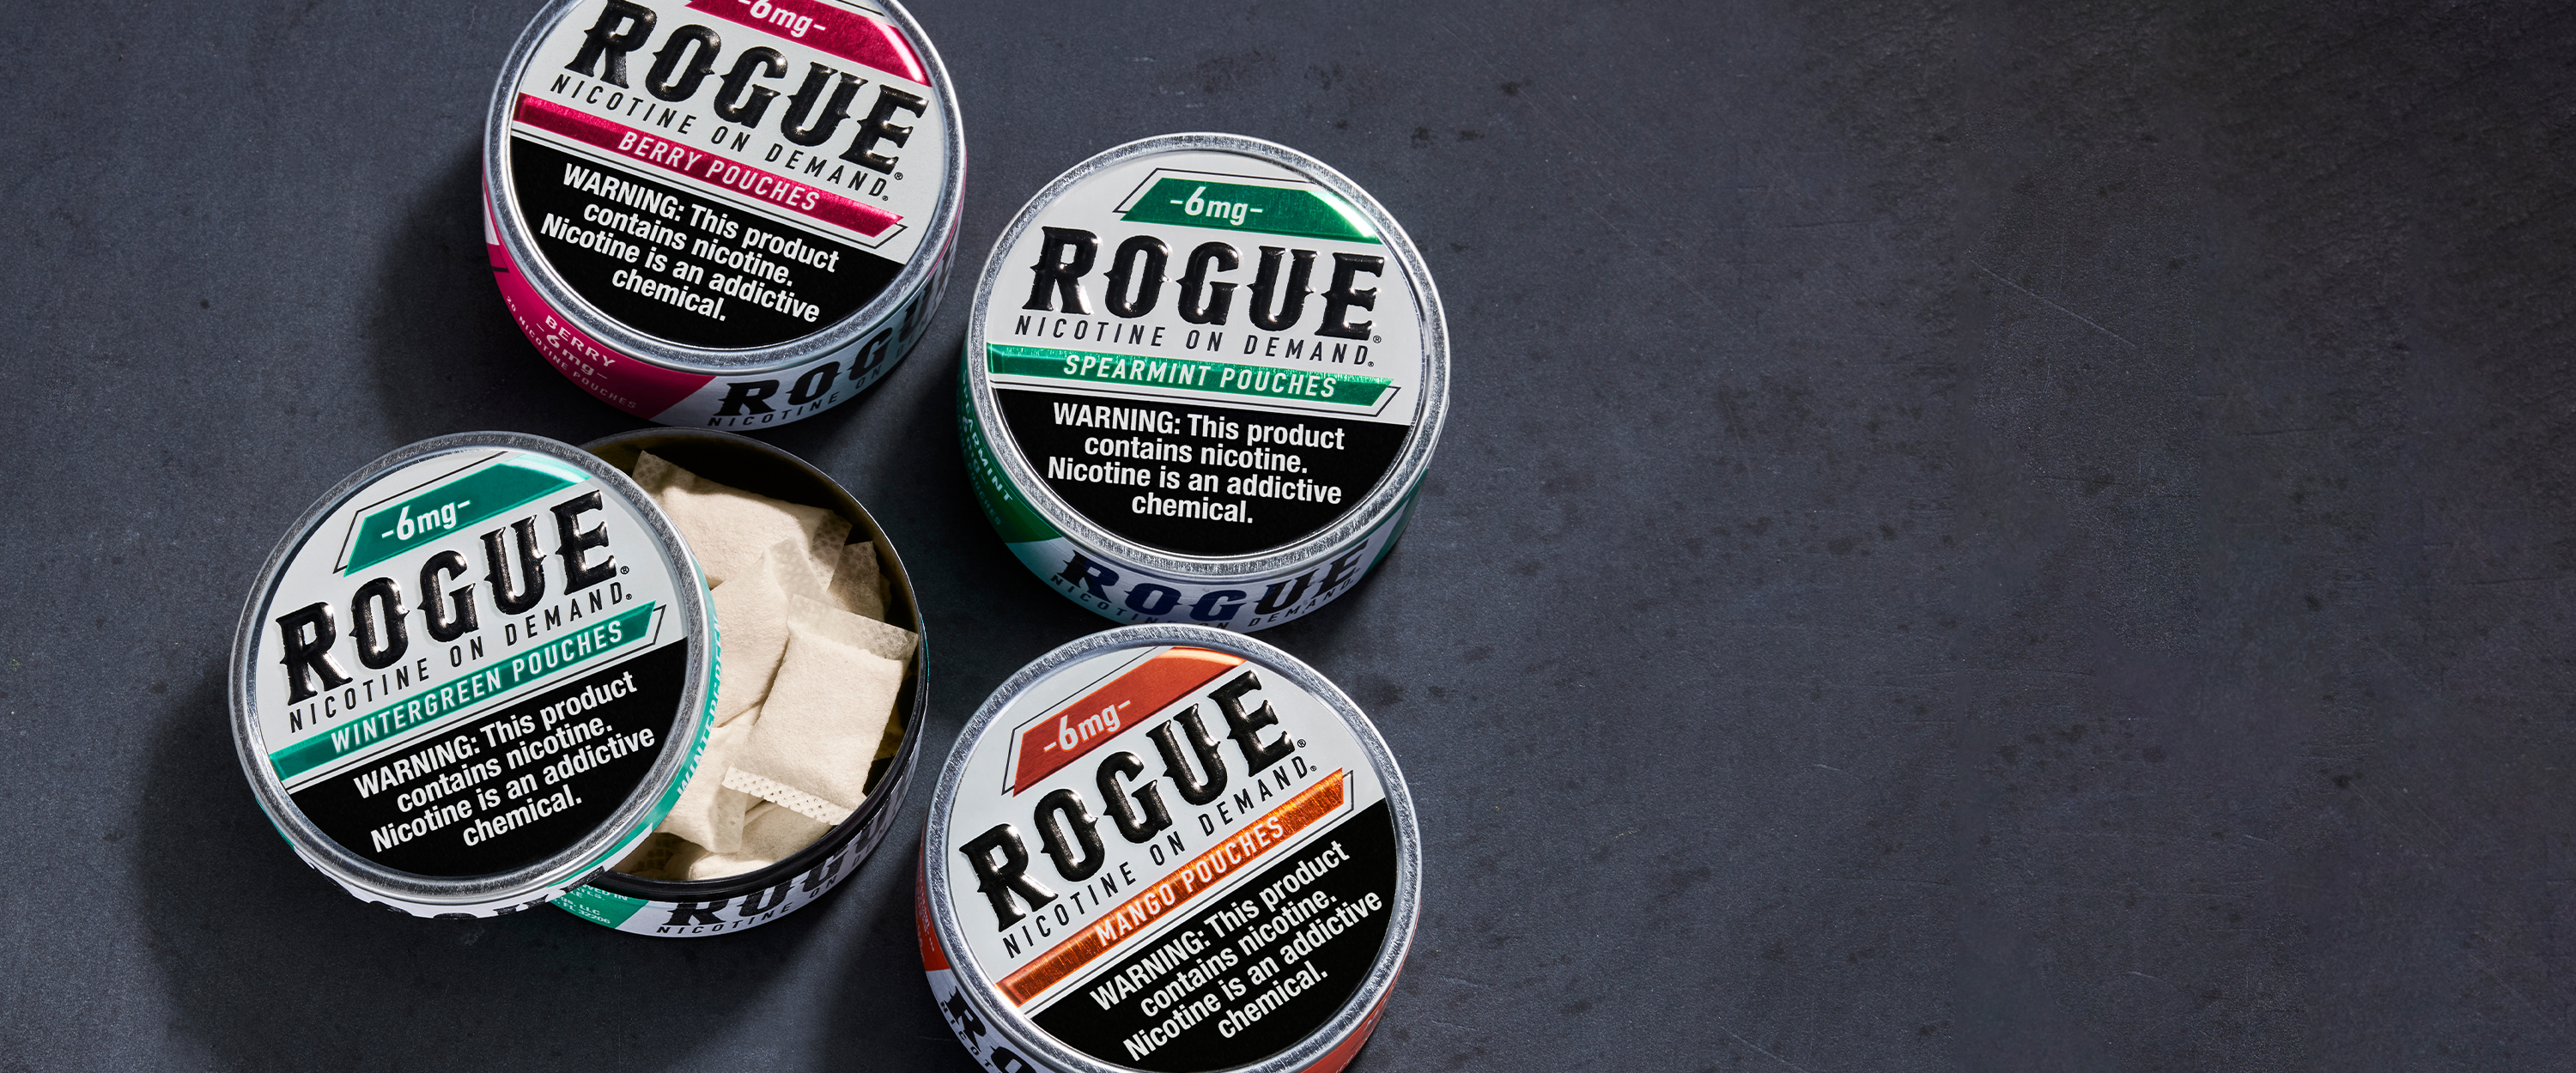 Rogue-Products-Image